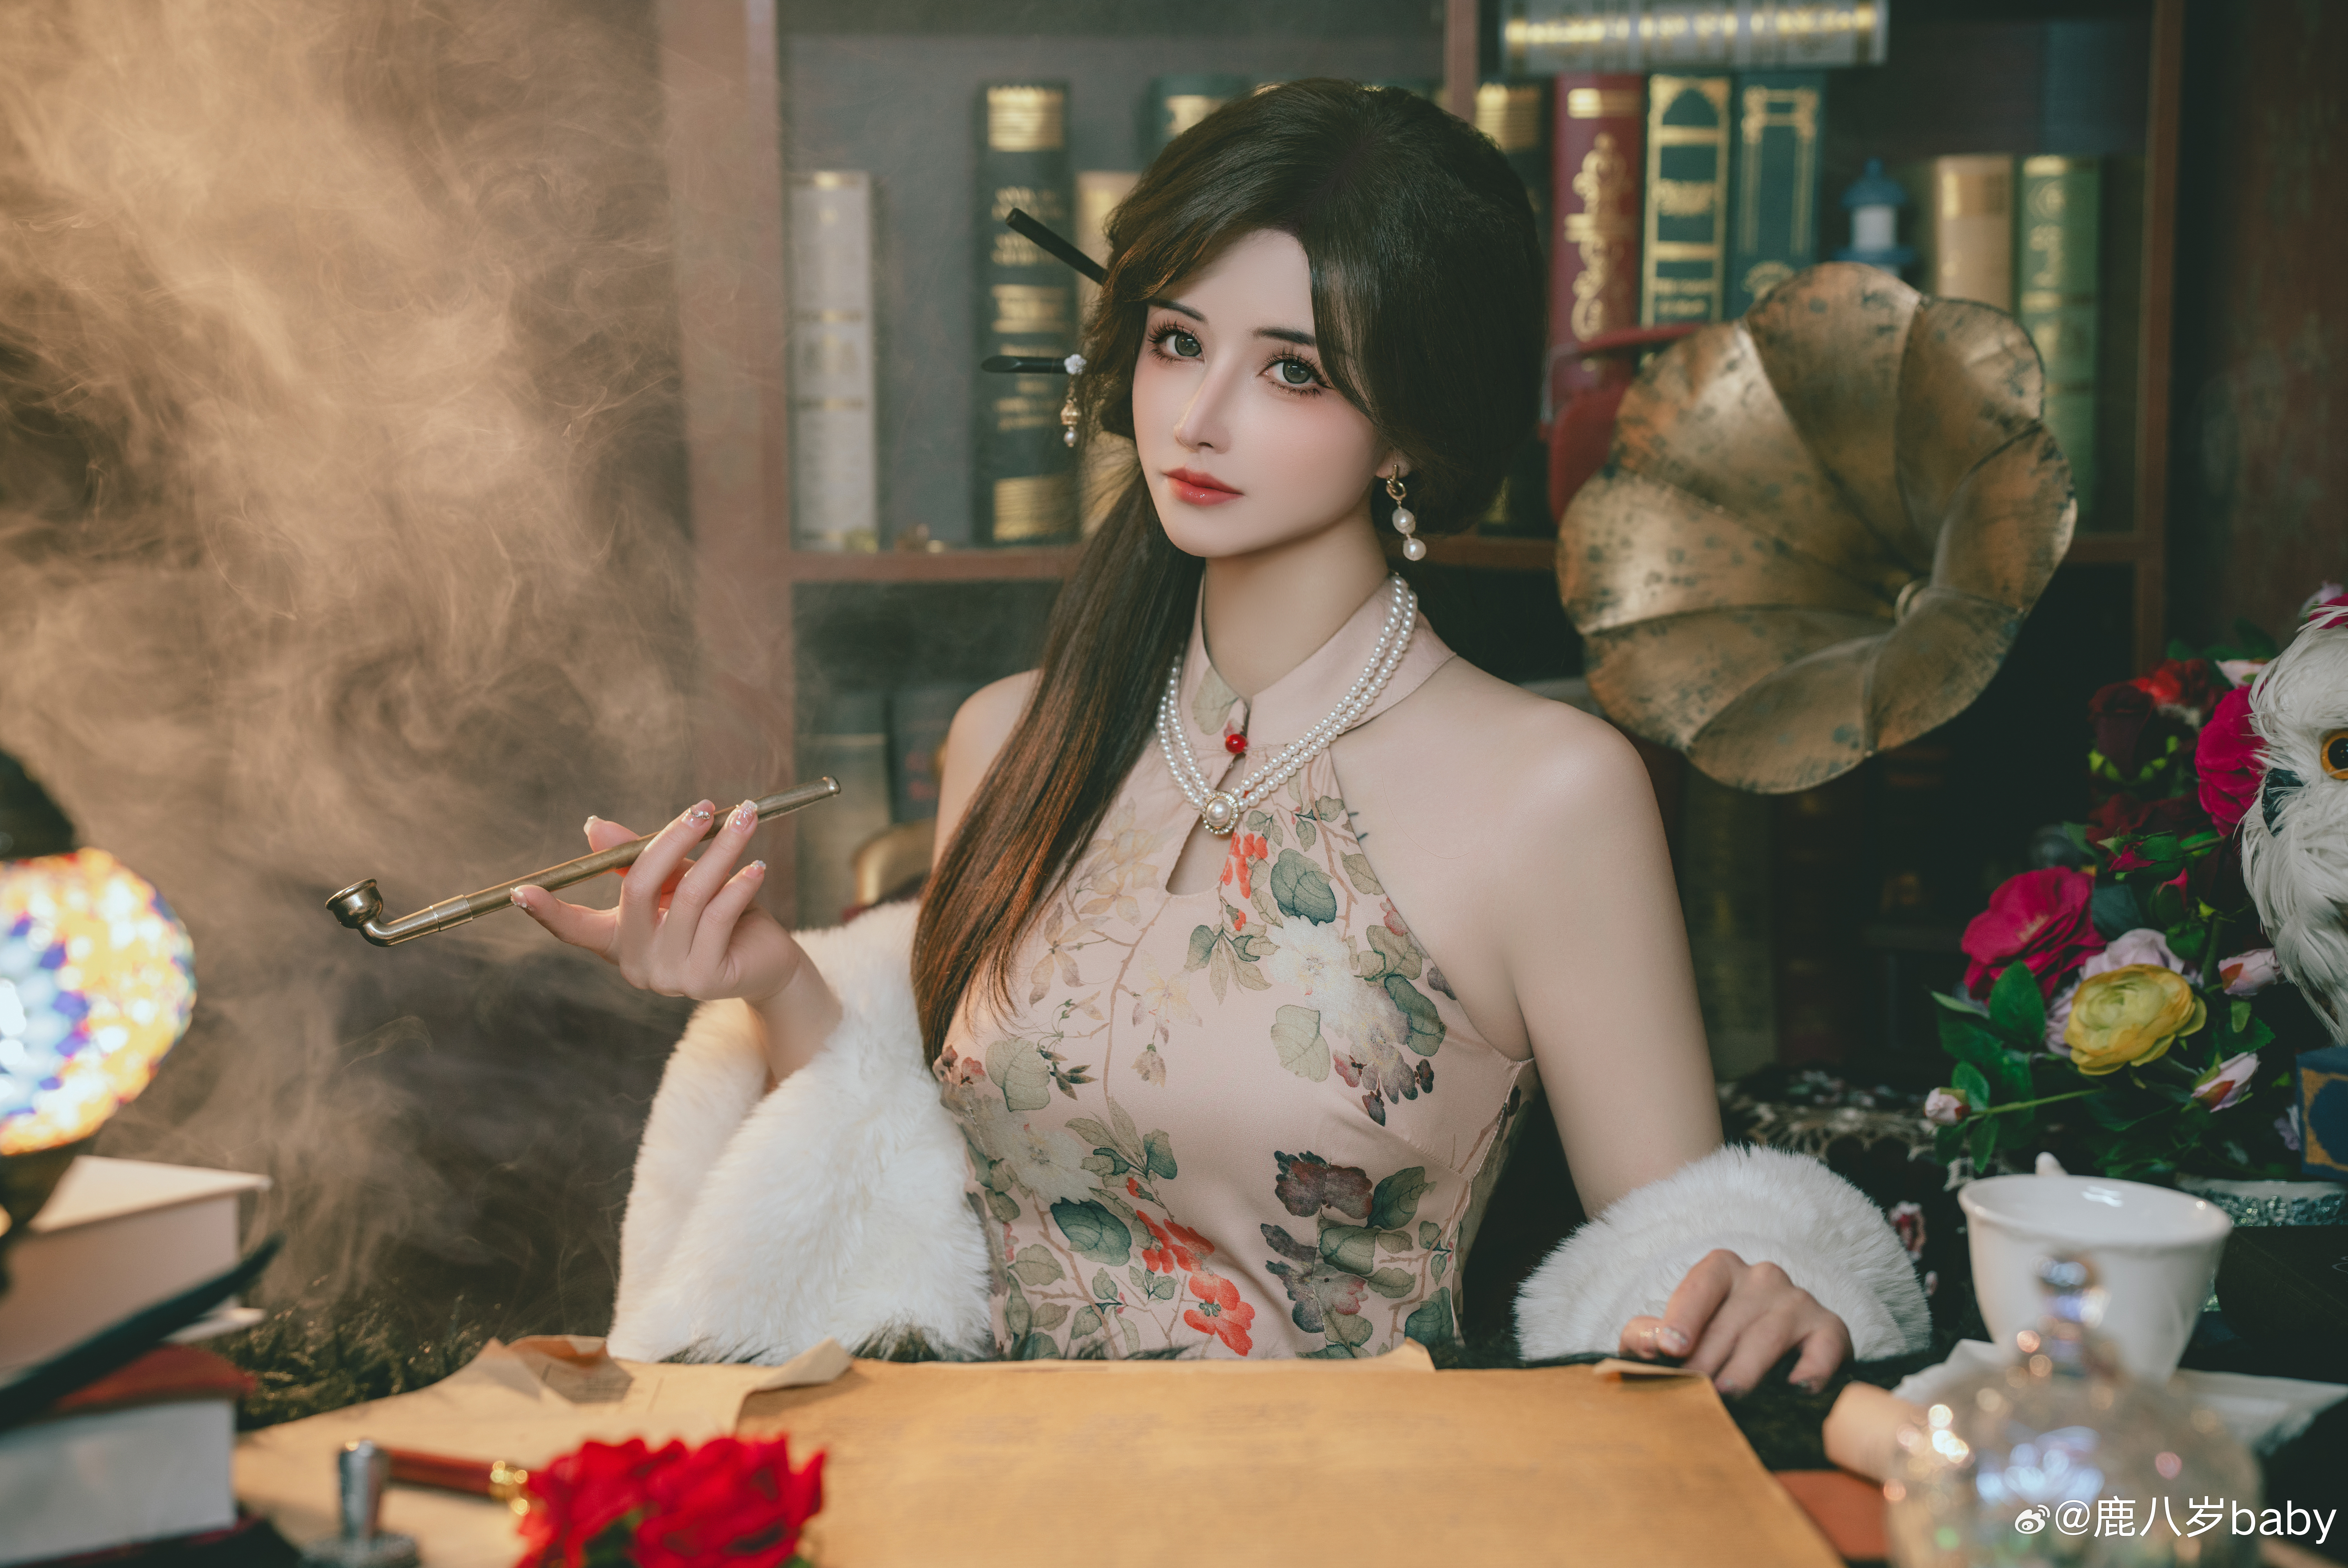 People 8480x5664 cosplay women Asian Lulubaby looking at viewer sitting bare shoulders rose watermarked Weibo closed mouth long hair fur smoking pipe smoke pearl necklace indoors women indoors necklace shelves books earring dress dark hair lip gloss leaves